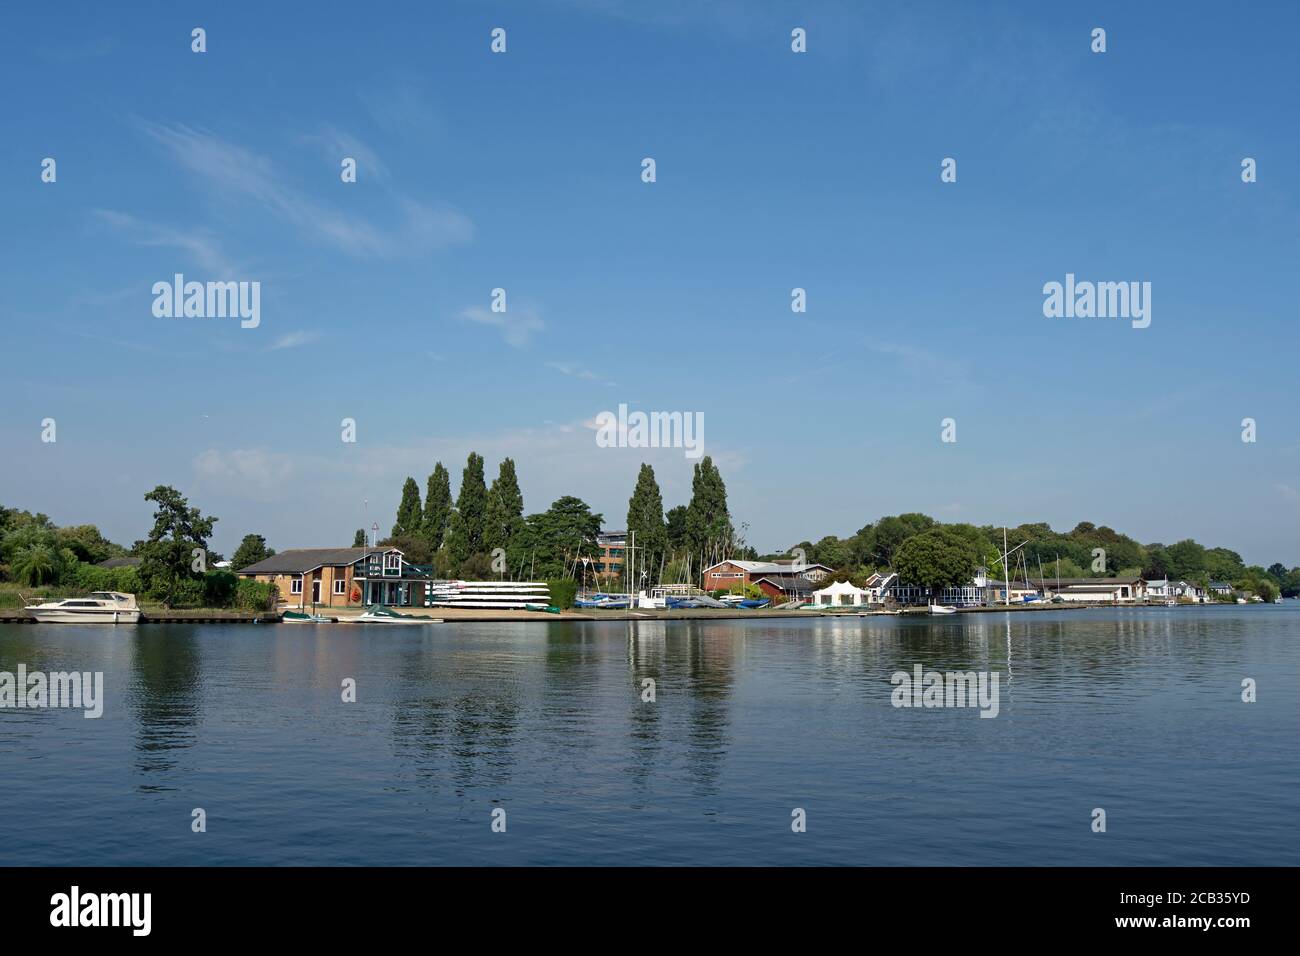 view across a tranquil river thames from ham, surrey, england, towards the rowing clubs of teddington Stock Photo